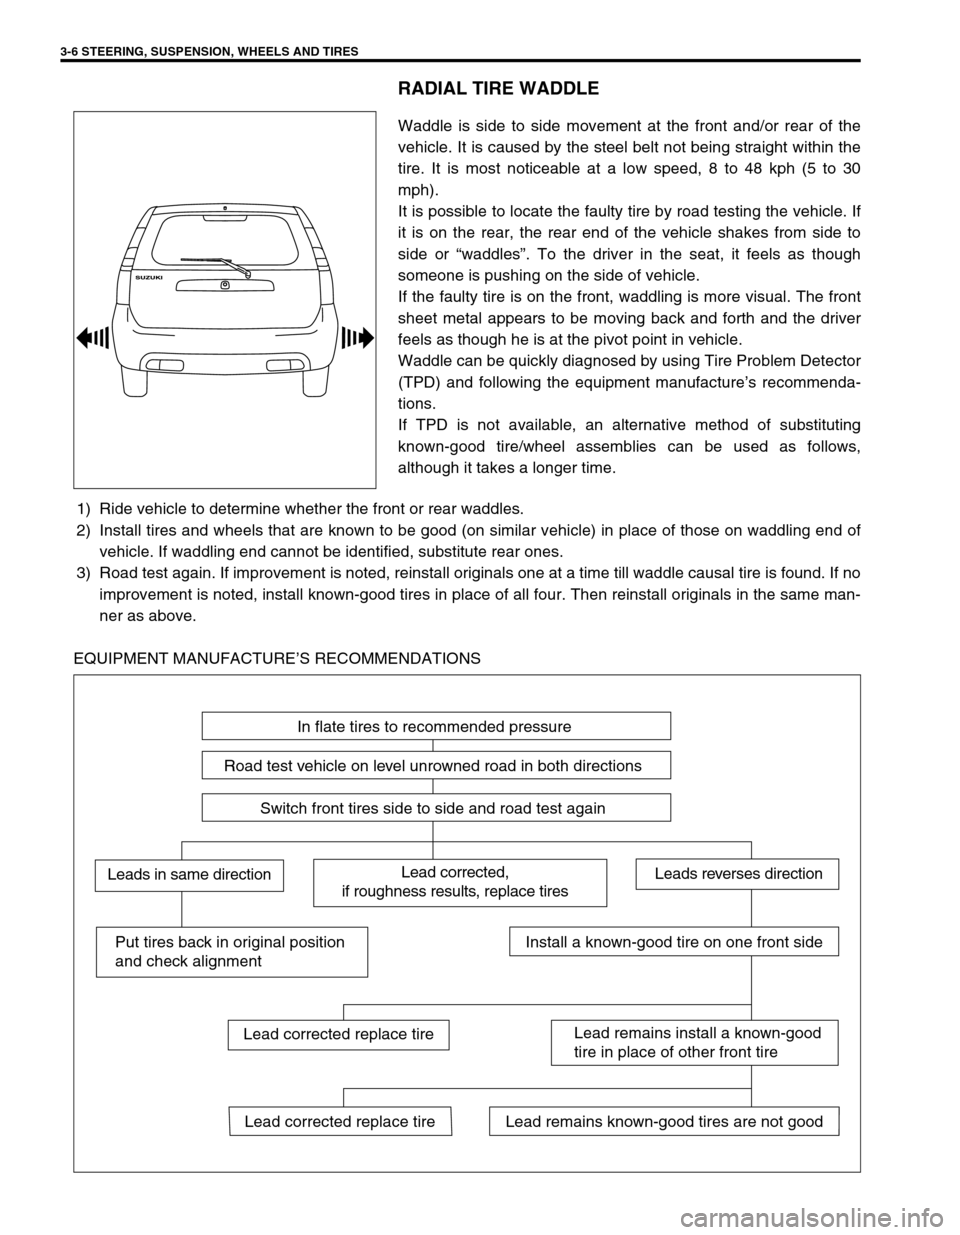 SUZUKI SWIFT 2000 1.G RG413 Service User Guide 3-6 STEERING, SUSPENSION, WHEELS AND TIRES
RADIAL TIRE WADDLE
Waddle is side to side movement at the front and/or rear of the
vehicle. It is caused by the steel belt not being straight within the
tire